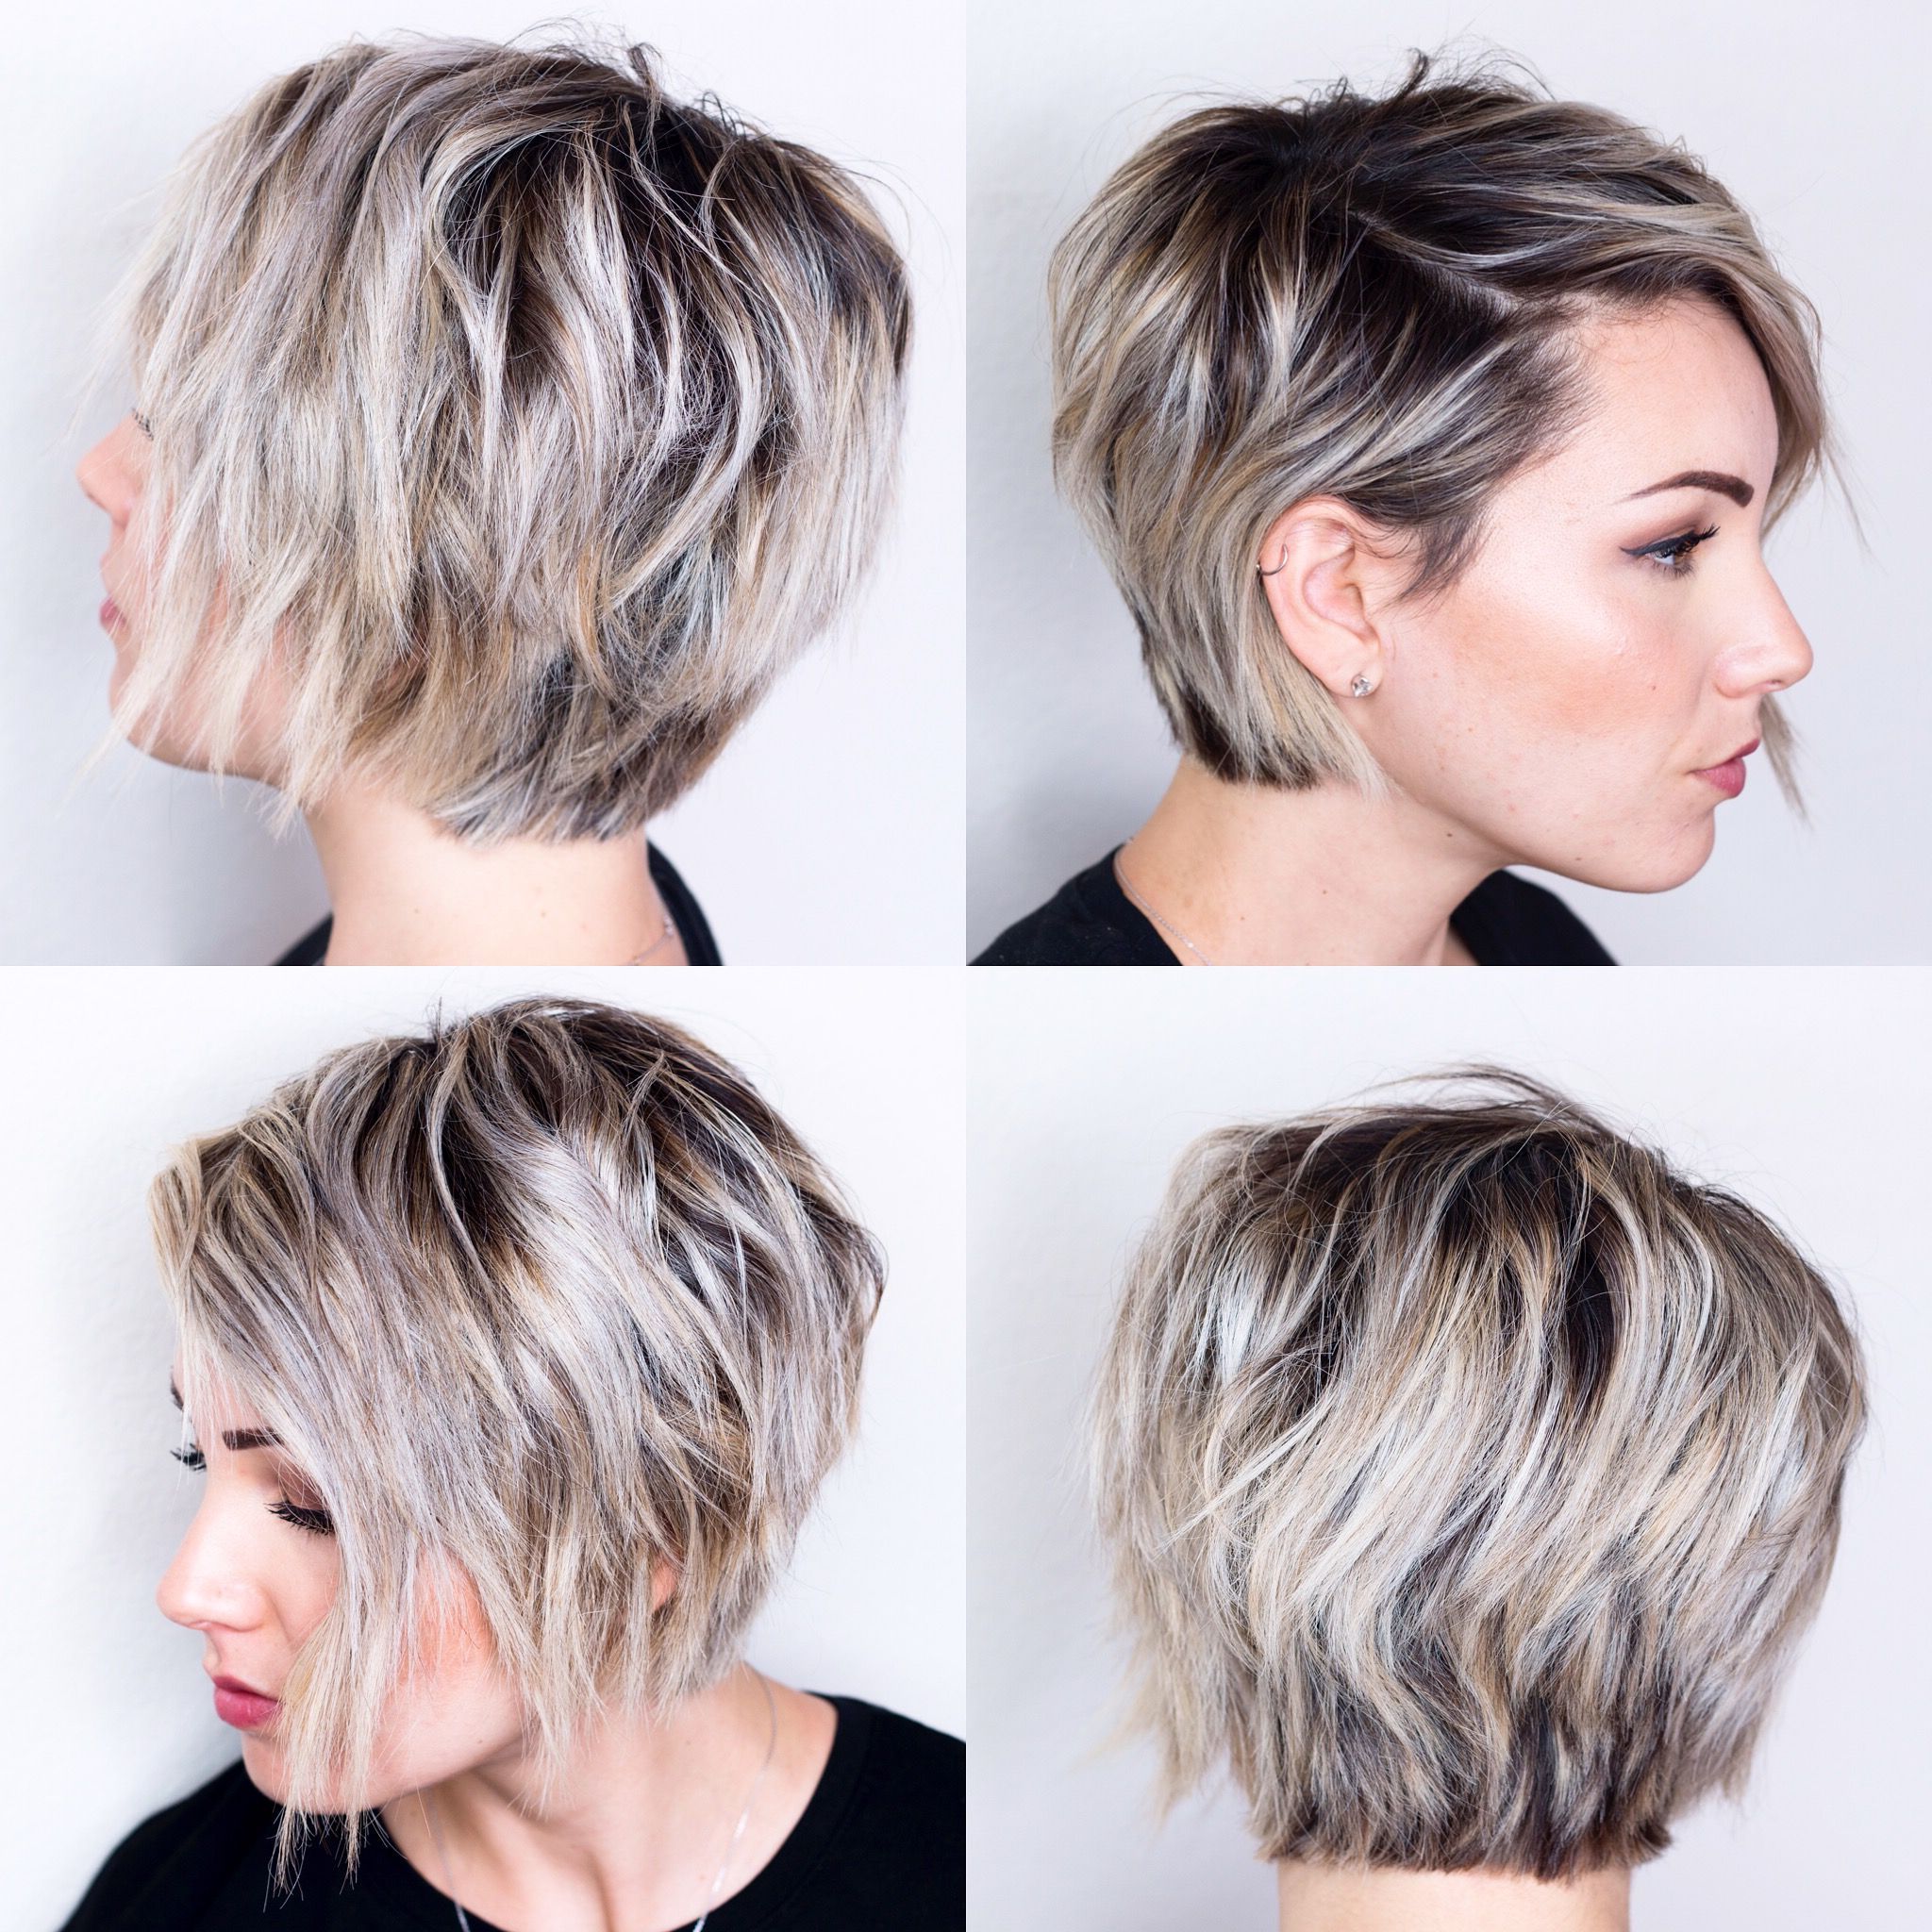 360 View Of Short Hair | H A I R In 2018 | Pinterest | Short Hair Regarding Short Hairstyles For An Oval Face (Photo 3 of 25)